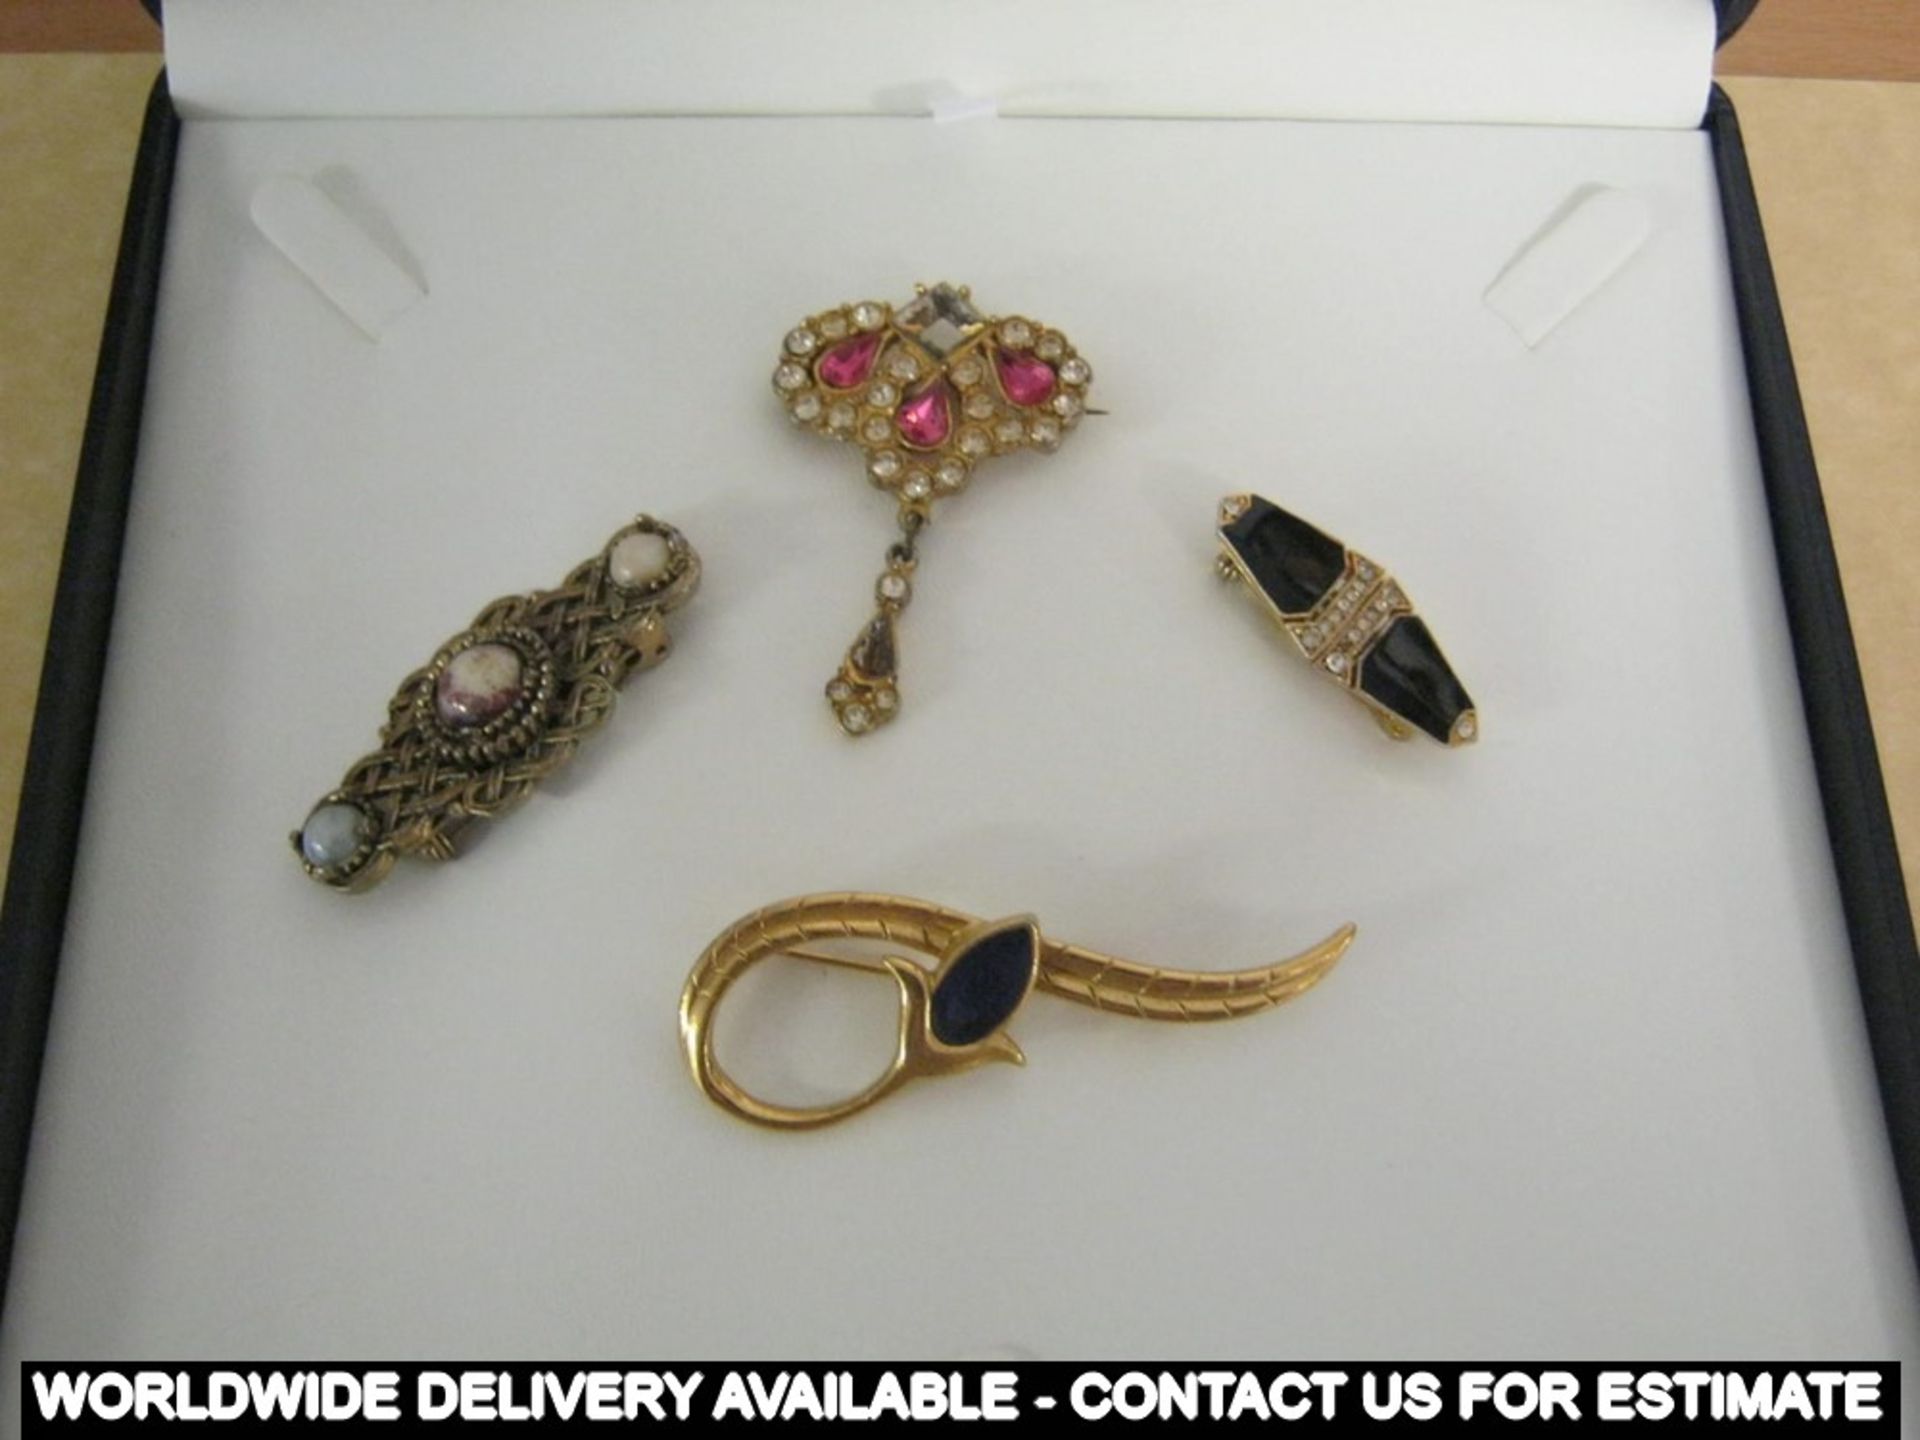 Four vintage brooches in presentation box